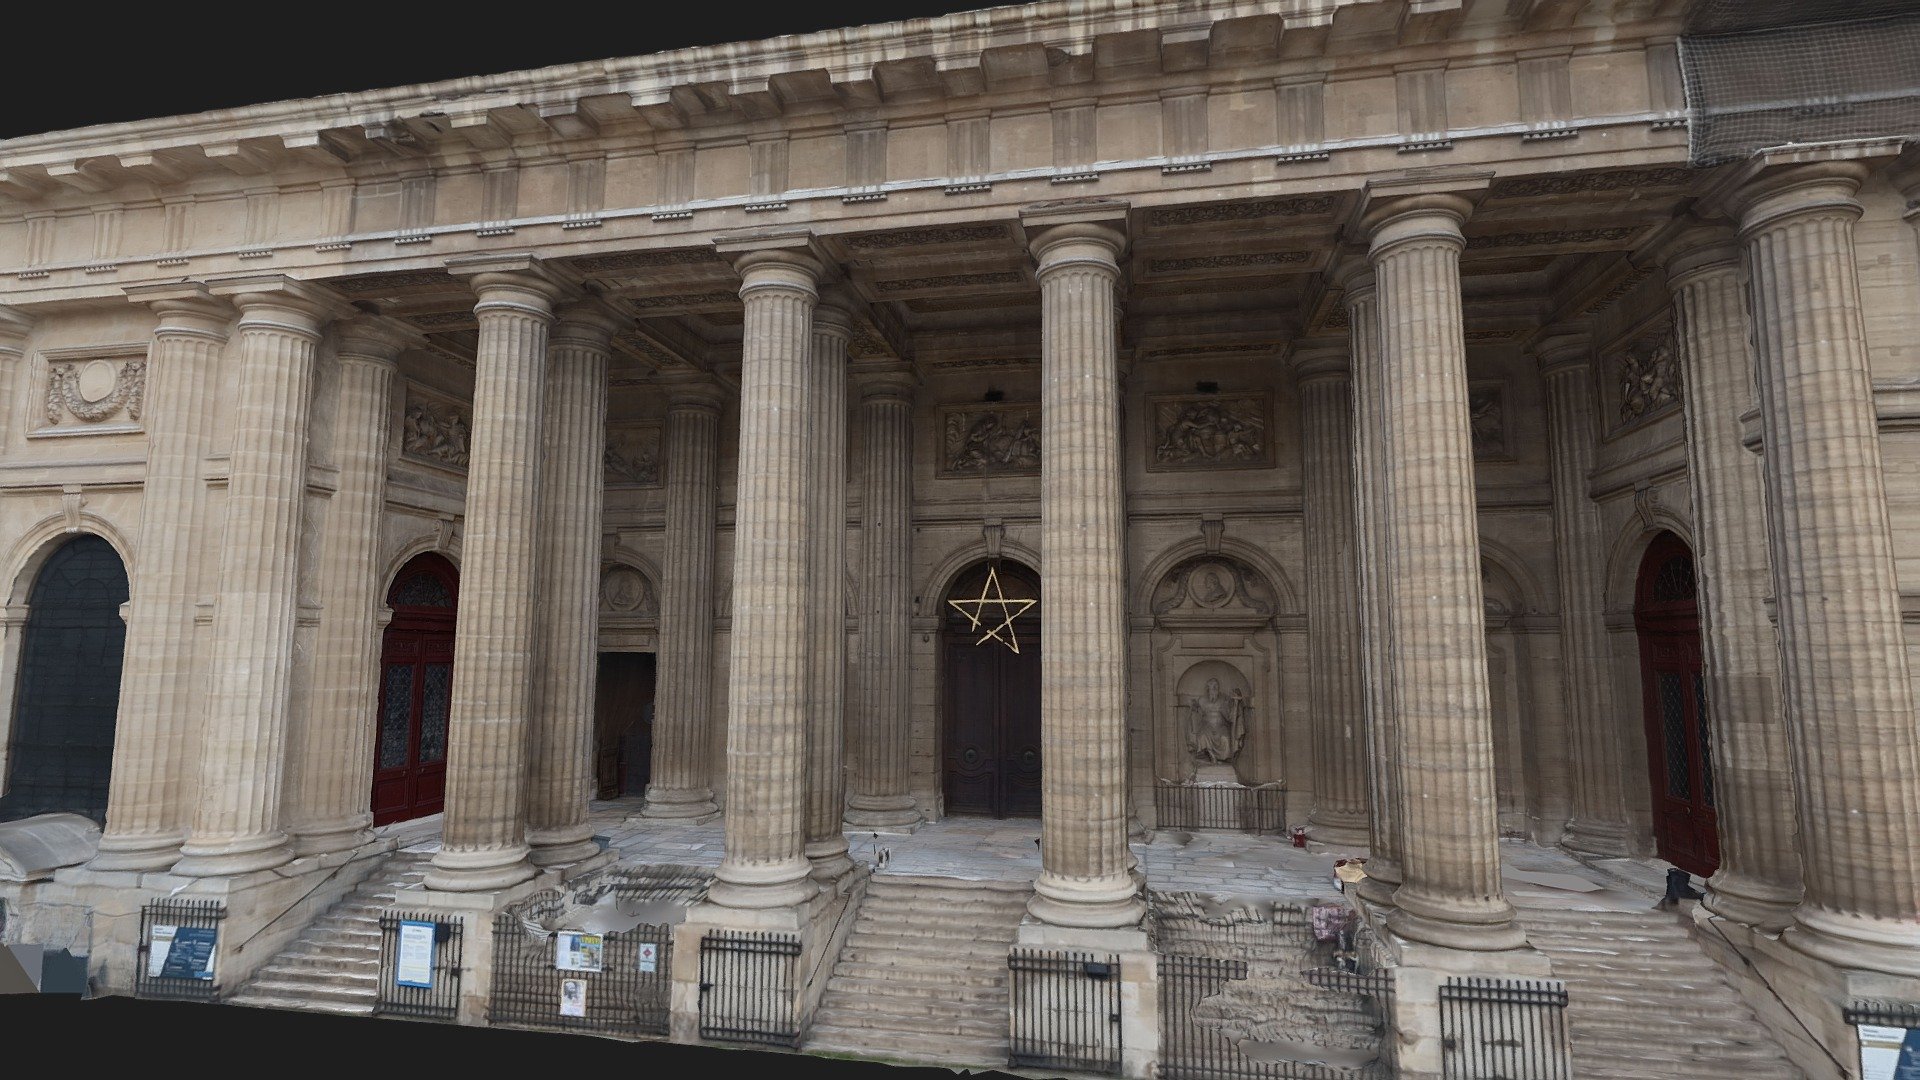 The square has been scanned in high resolution 0.1 mm / px for a total immersion in augmented reality. 

The Saint-Sulpice church is a Catholic parish church located in the Odéon district, 75006 Paris.

3D facade scan

Download features:

FBX, file format

Optimized UV layout

8K textures (shown here - included in download)

Textures in PNG

Download size : 86 mb

Mesh properties :

Optimised poly count (300K triangles)

Topology model is OK

Scale is OK

Canon G7X, Photos, 984

VR / AR ir ready - Église Saint-Sulpice, Paris (Zoom Parvis) - Buy Royalty Free 3D model by thomaxelleclair (@thomasleclair) 3d model